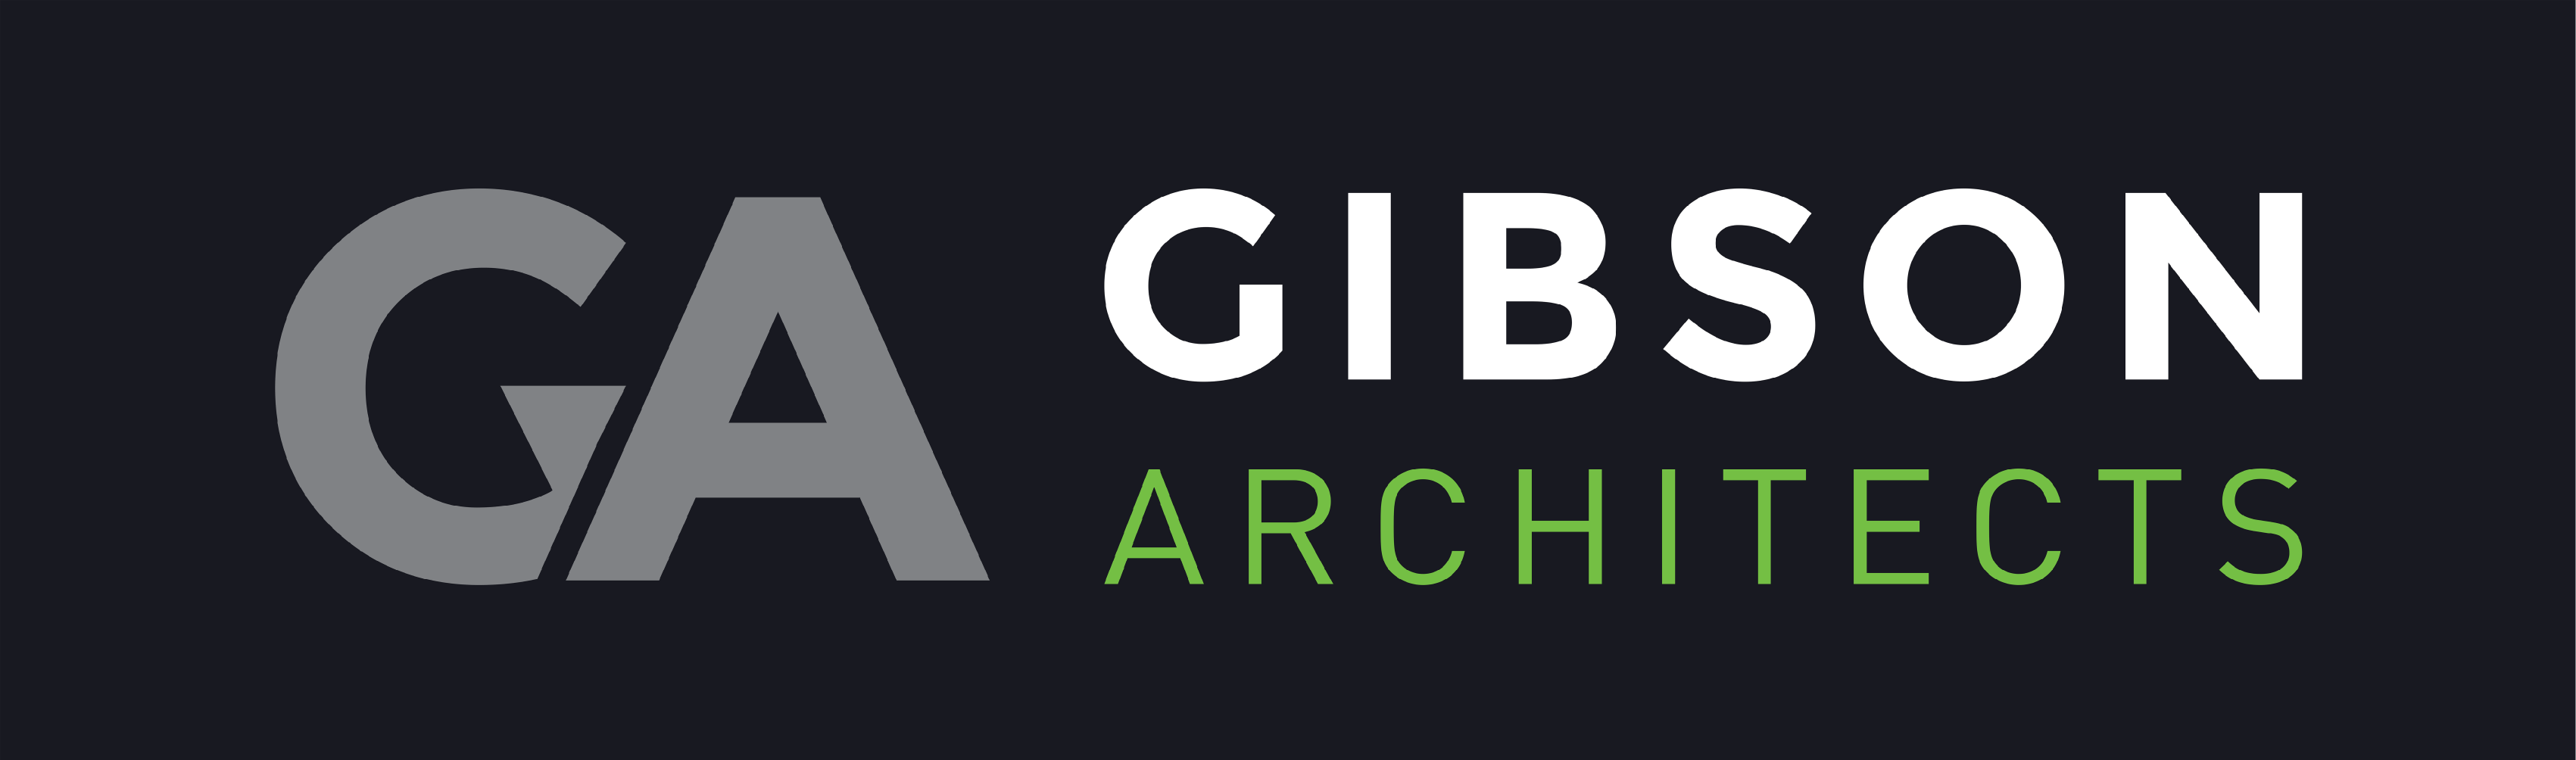 Gibson-Architects.png